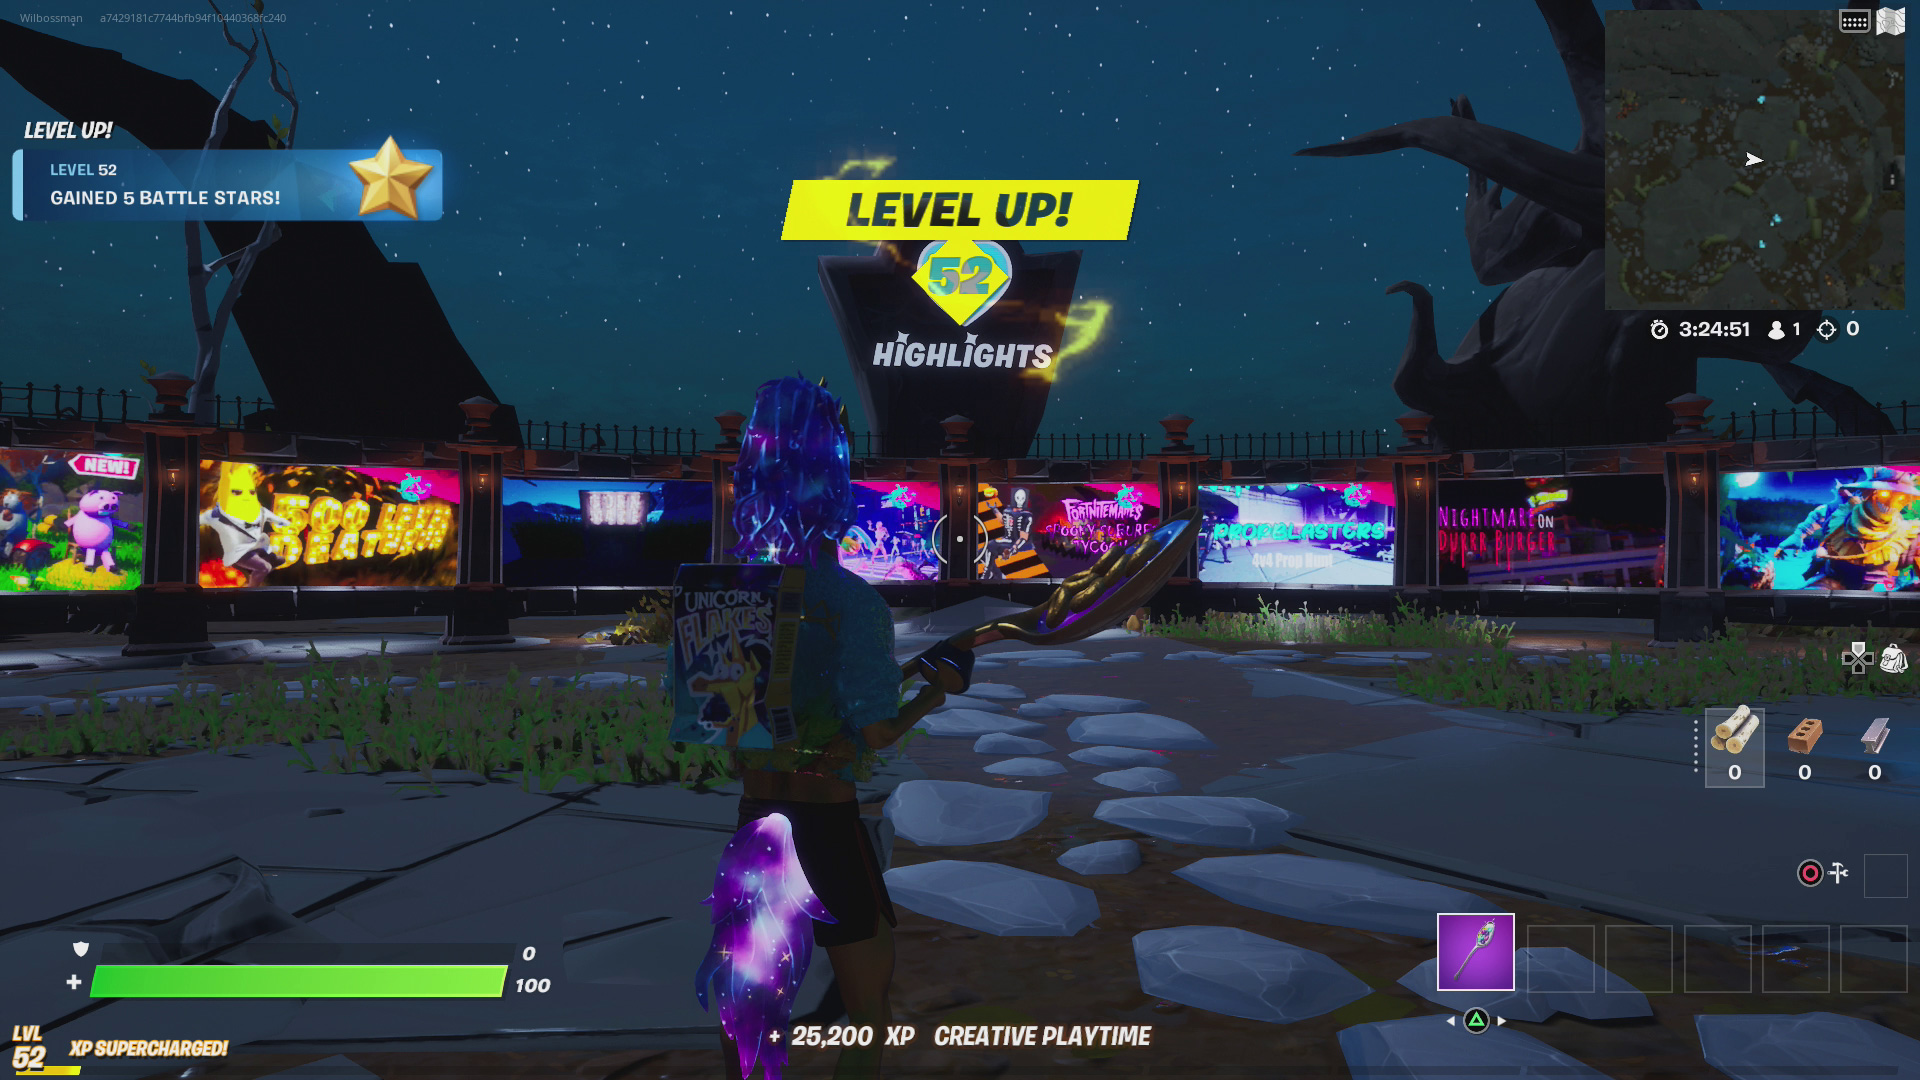 How to Level Up Quickly in Fortnite